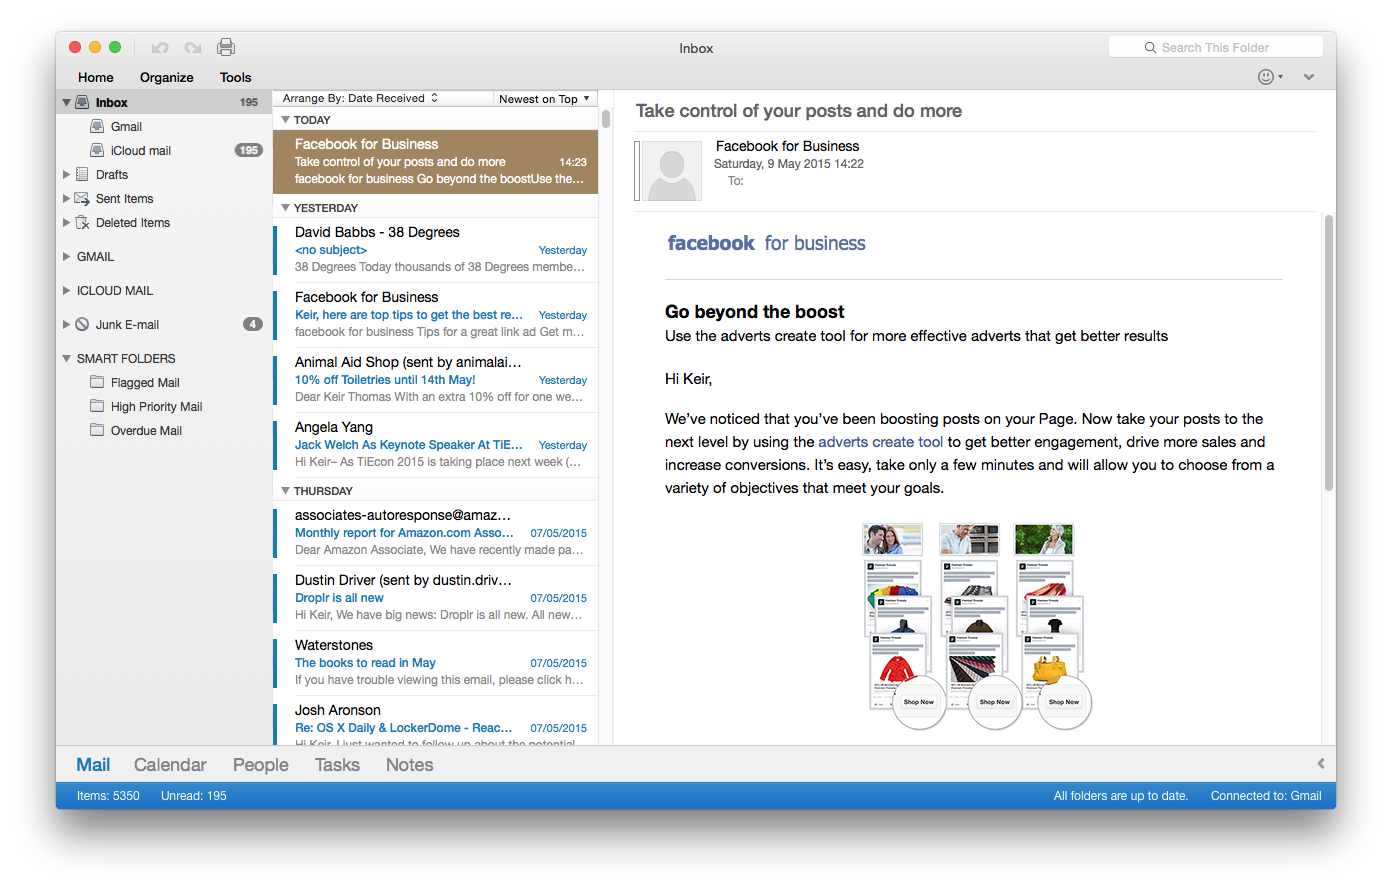 outlook application for mac